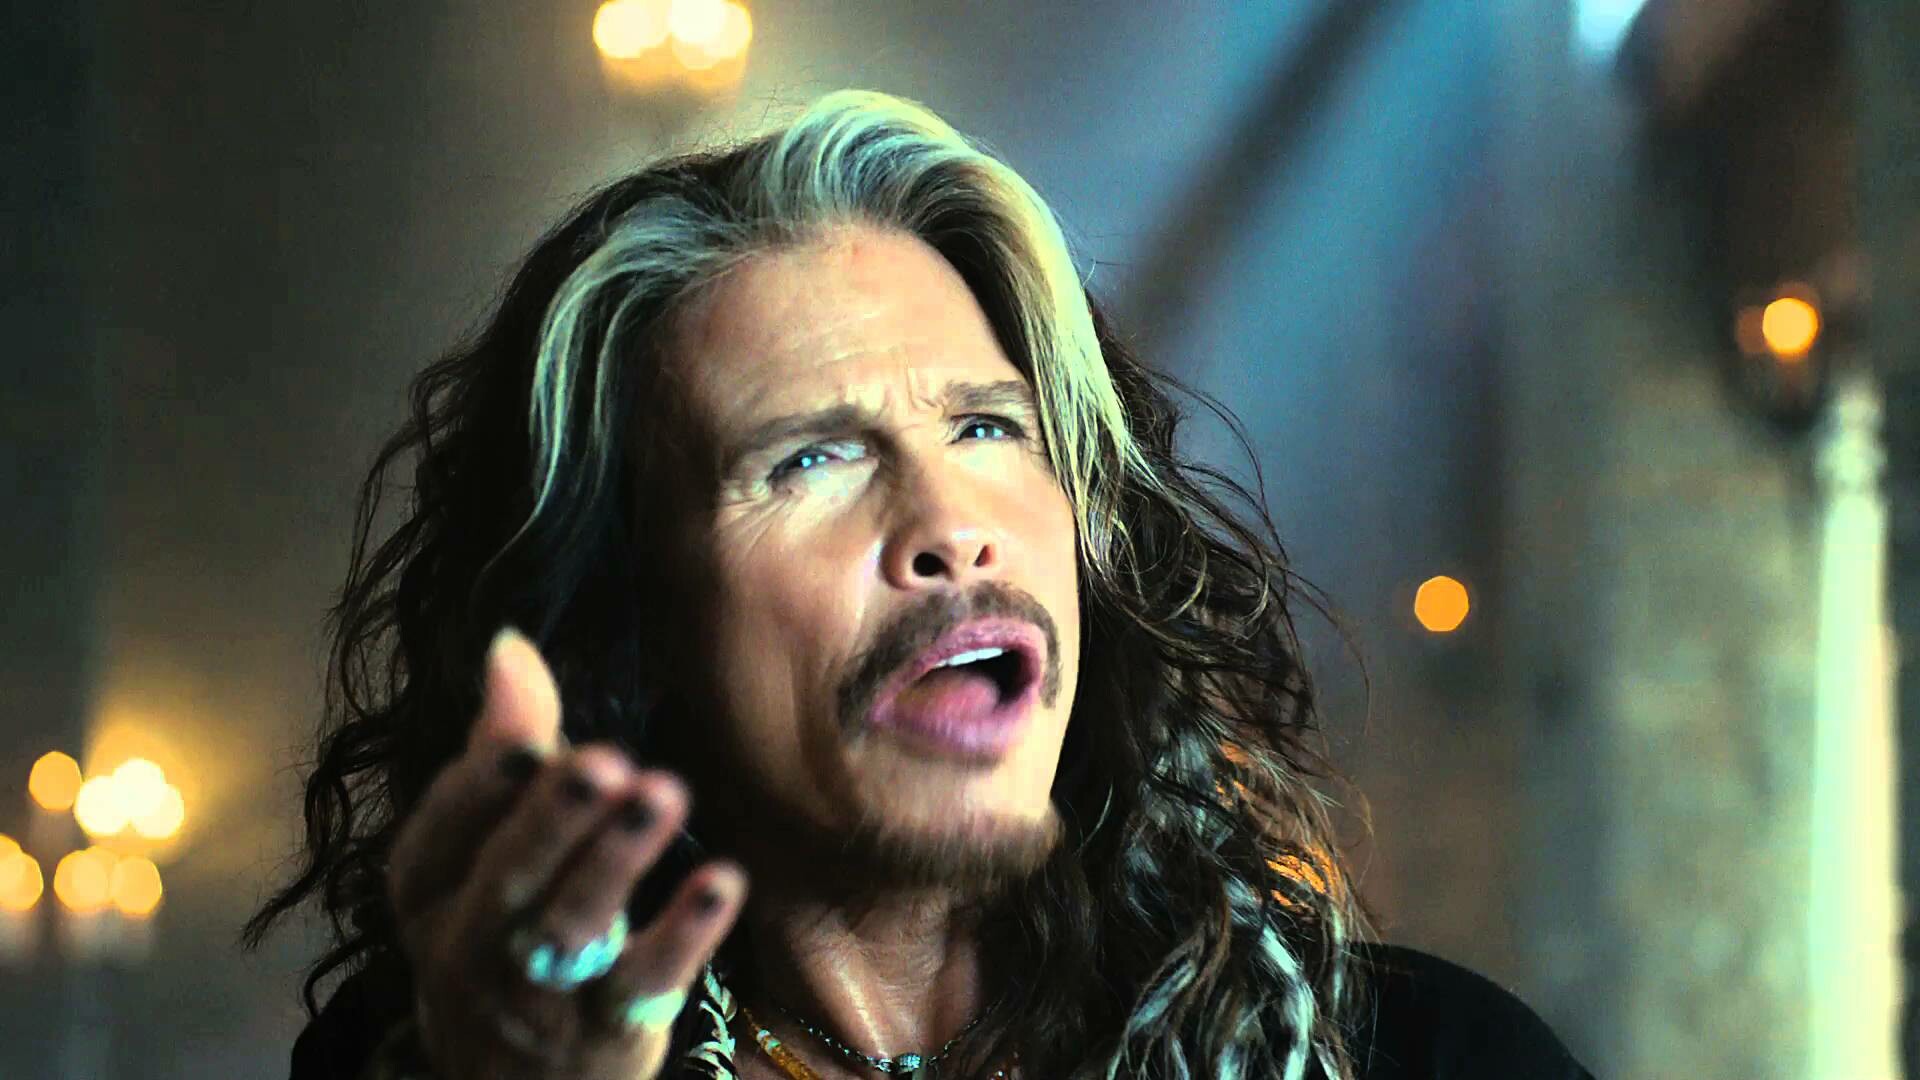 Aerosmith: Steven Tyler, The band achieved their first number-one hit with "I Don't Want to Miss a Thing" in 1998. 1920x1080 Full HD Wallpaper.